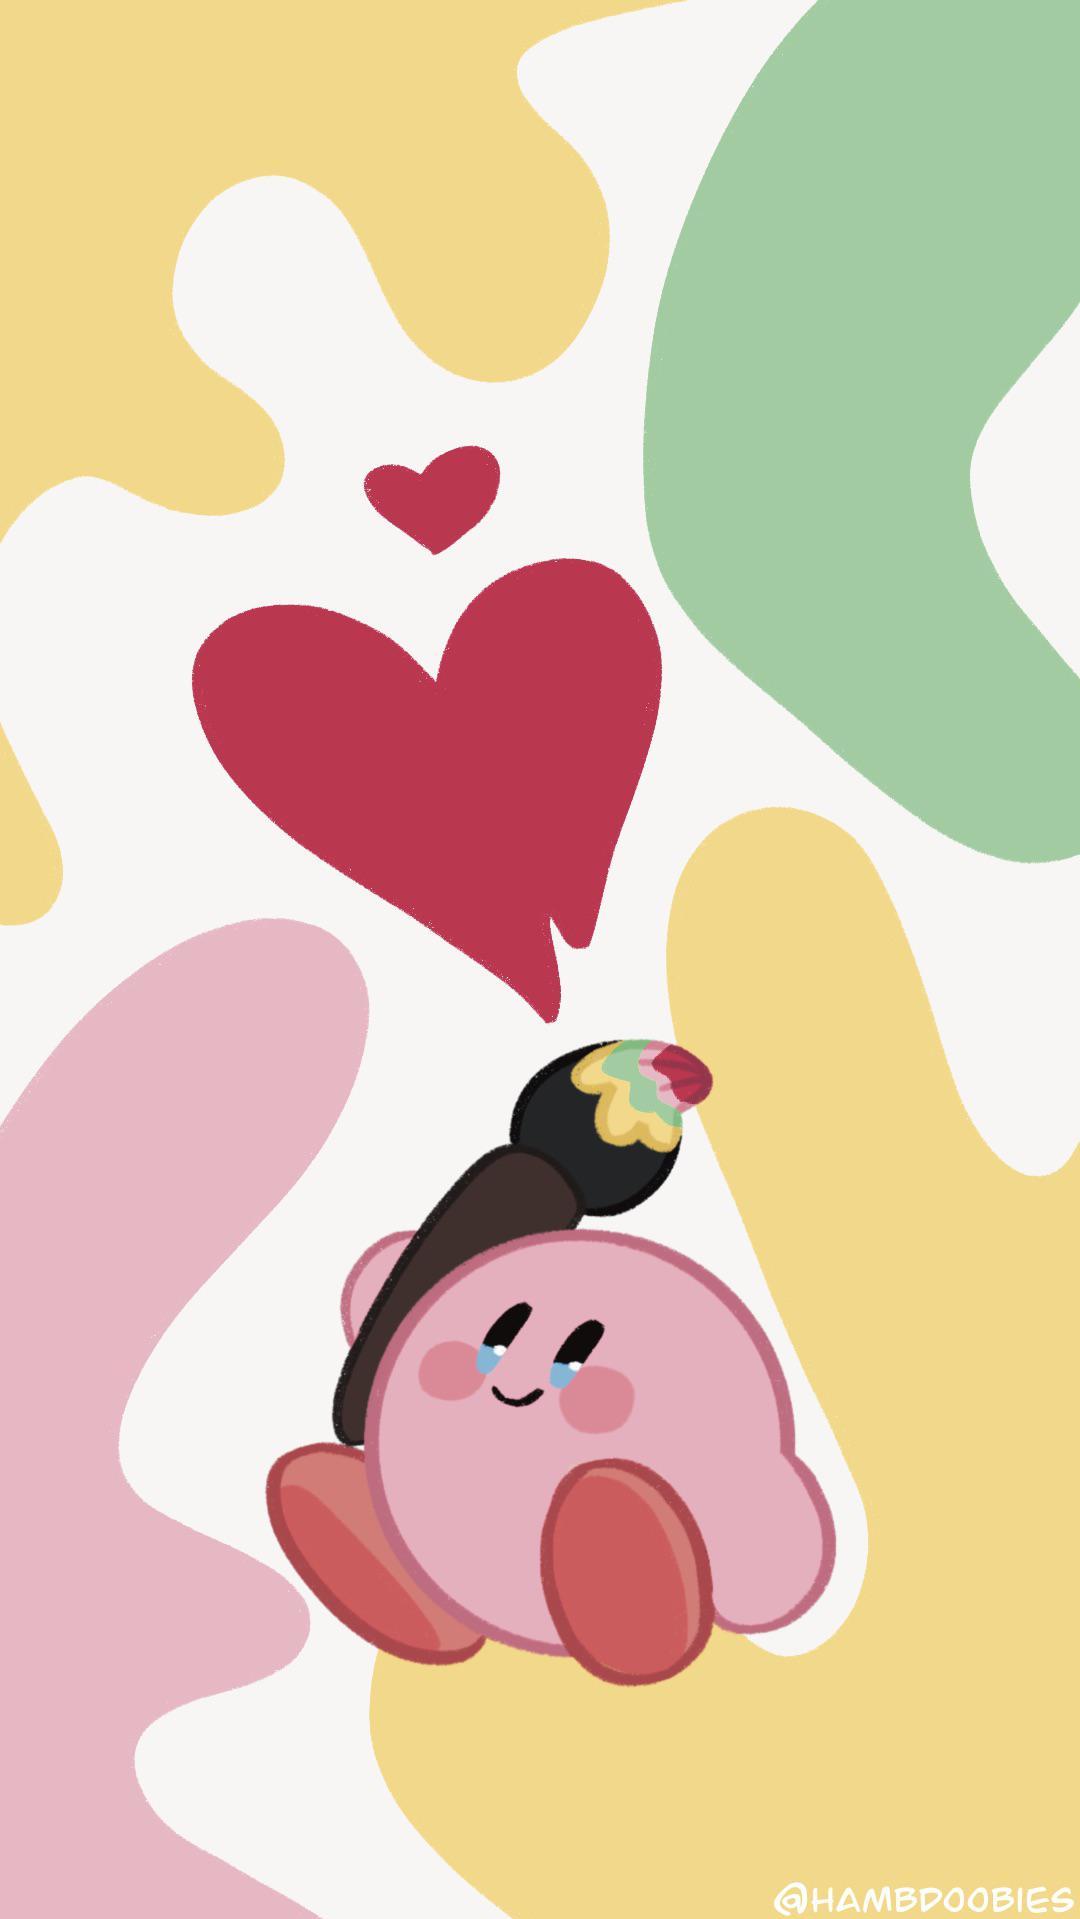 Theres not enough wallpapers of Kirby So Im going to make them